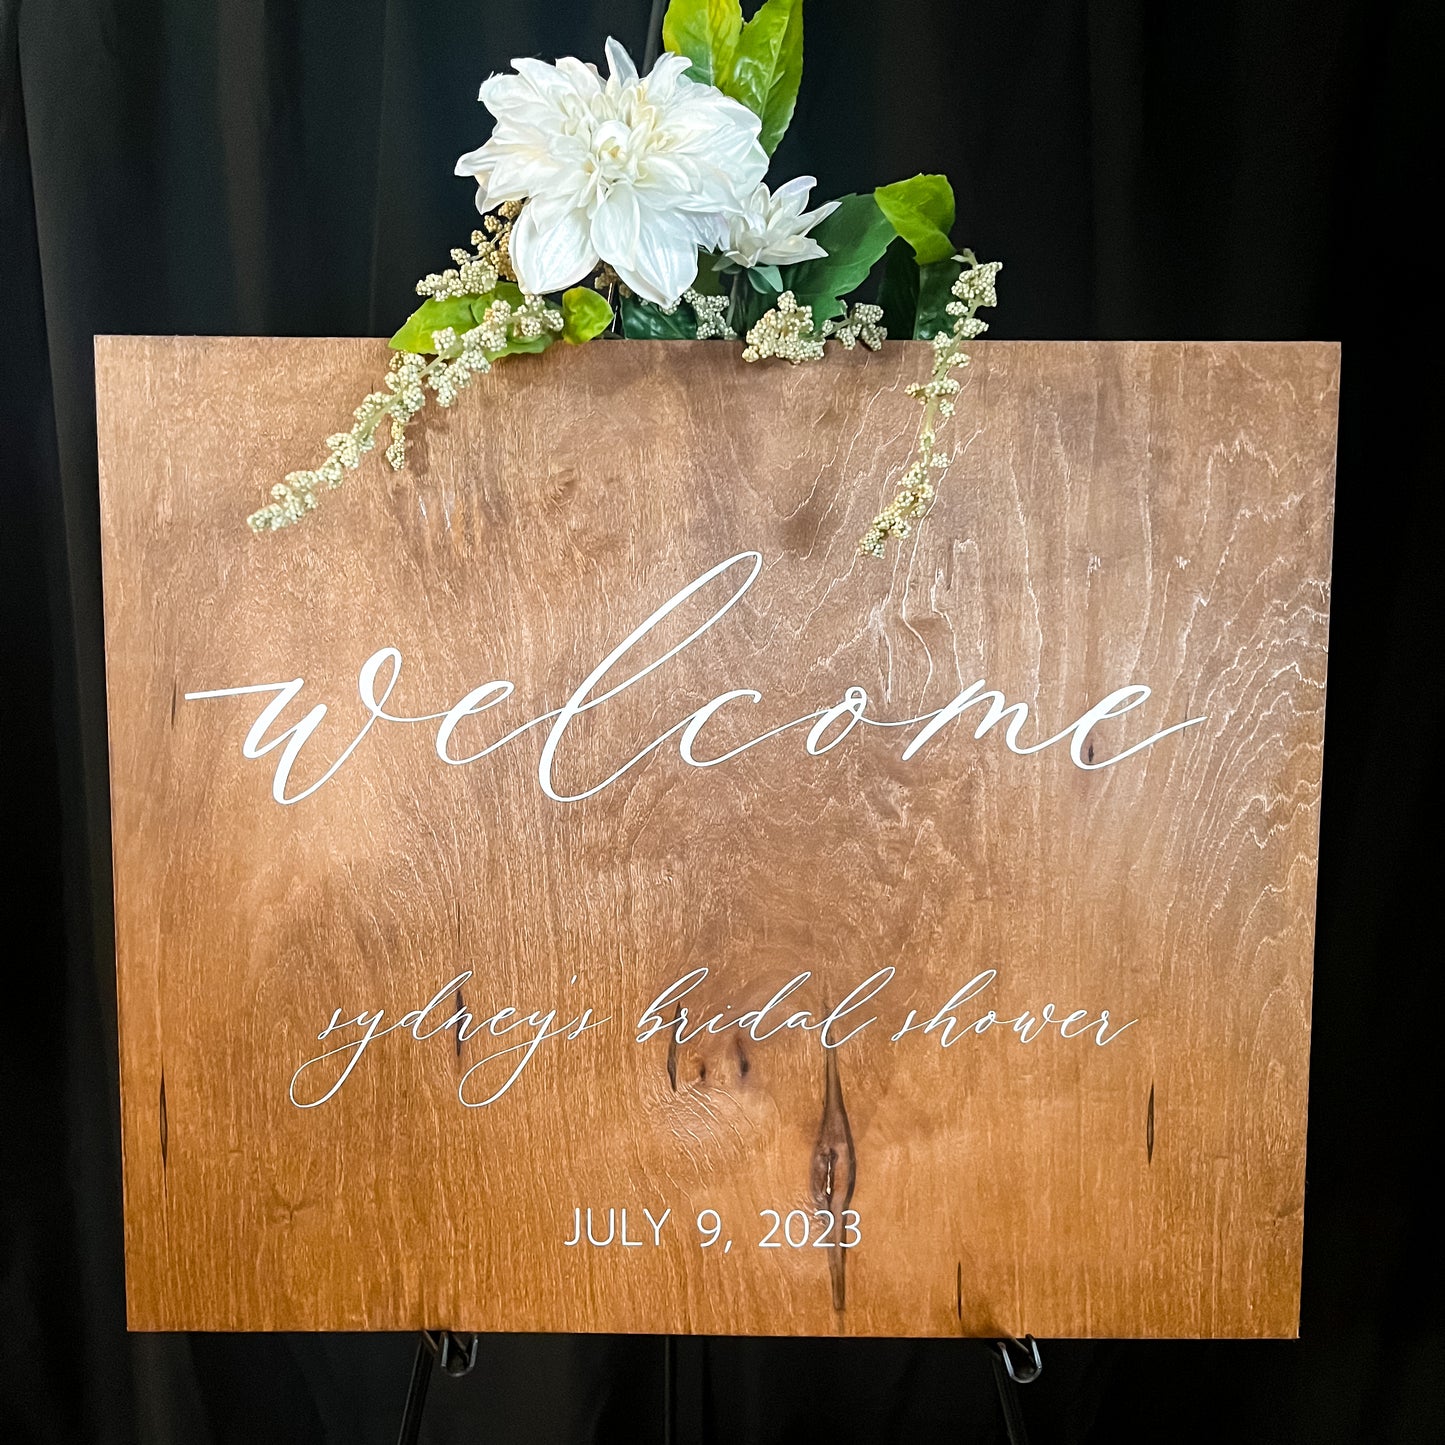 Customized Wood Stained Event Welcome Sign